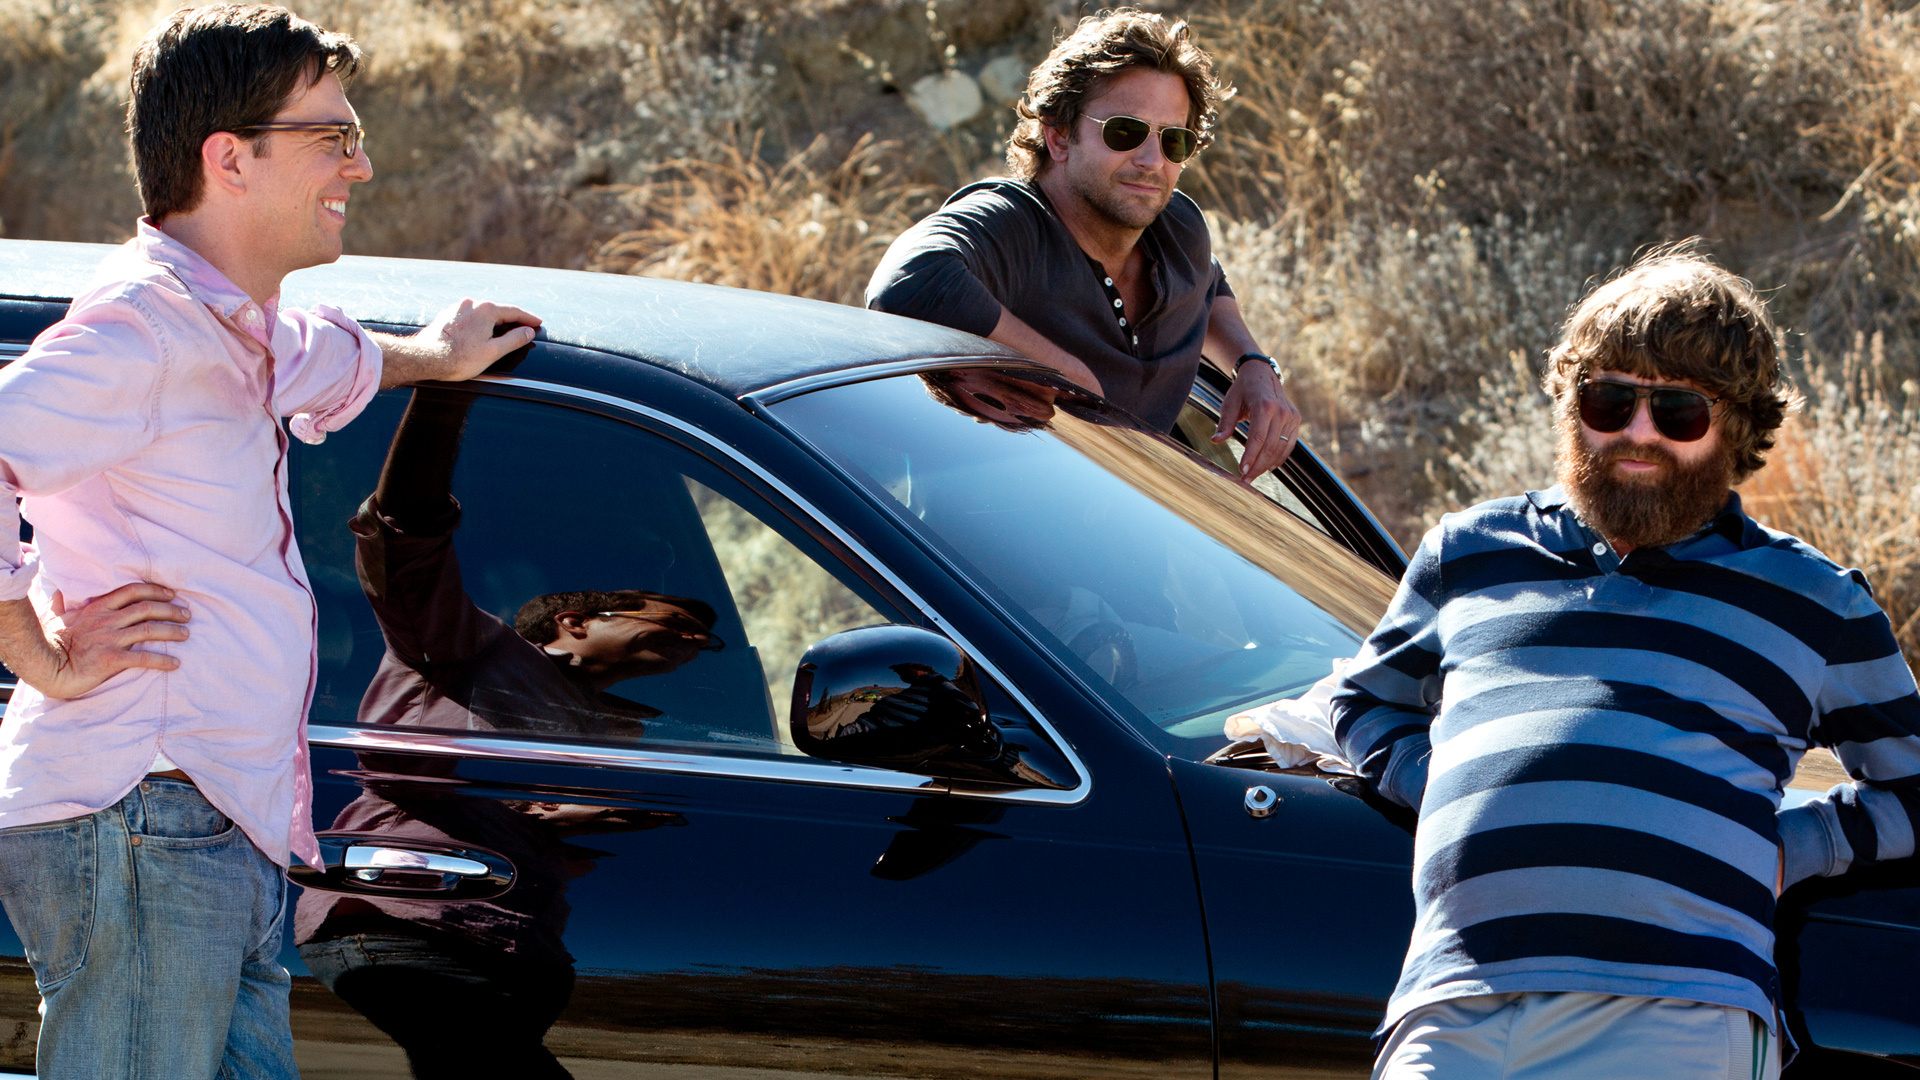 The Hangover: A 2013 American action comedy film, Part 3, Trilogy. 1920x1080 Full HD Wallpaper.